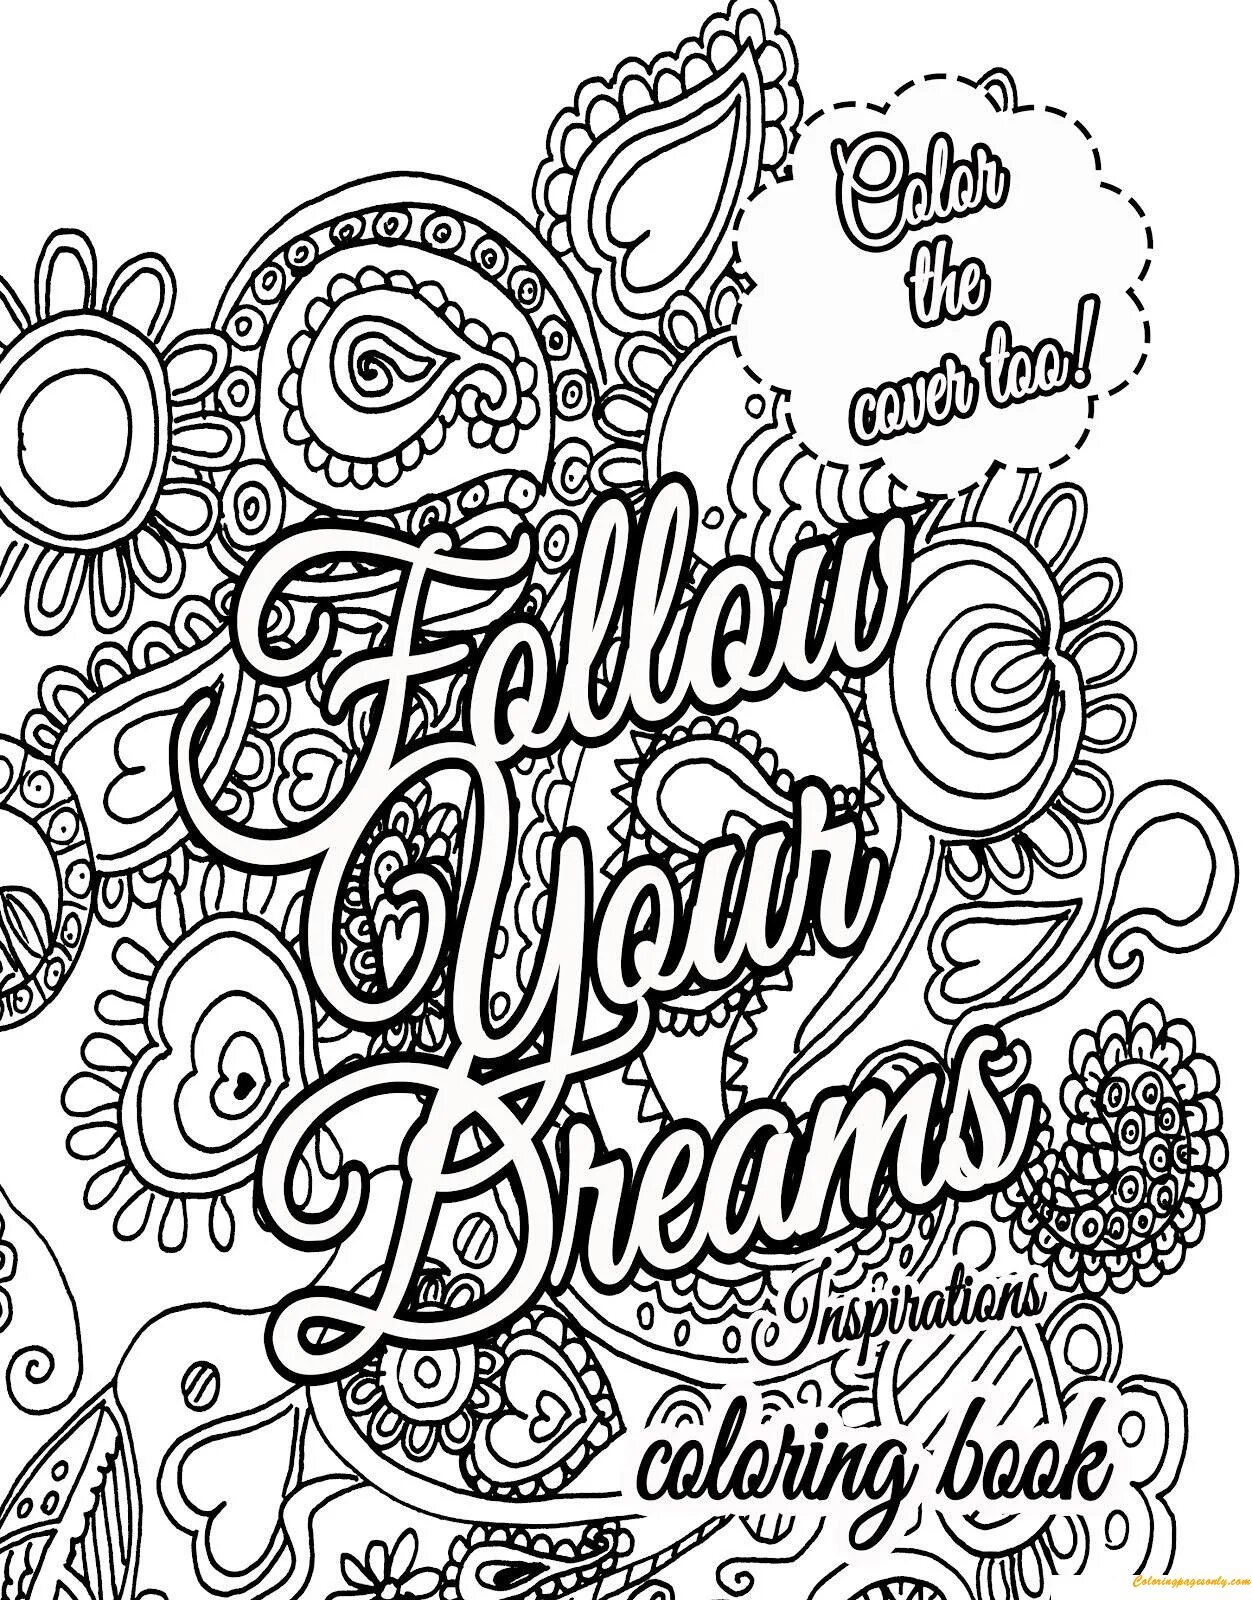 Anti-stress coloring book with great captions